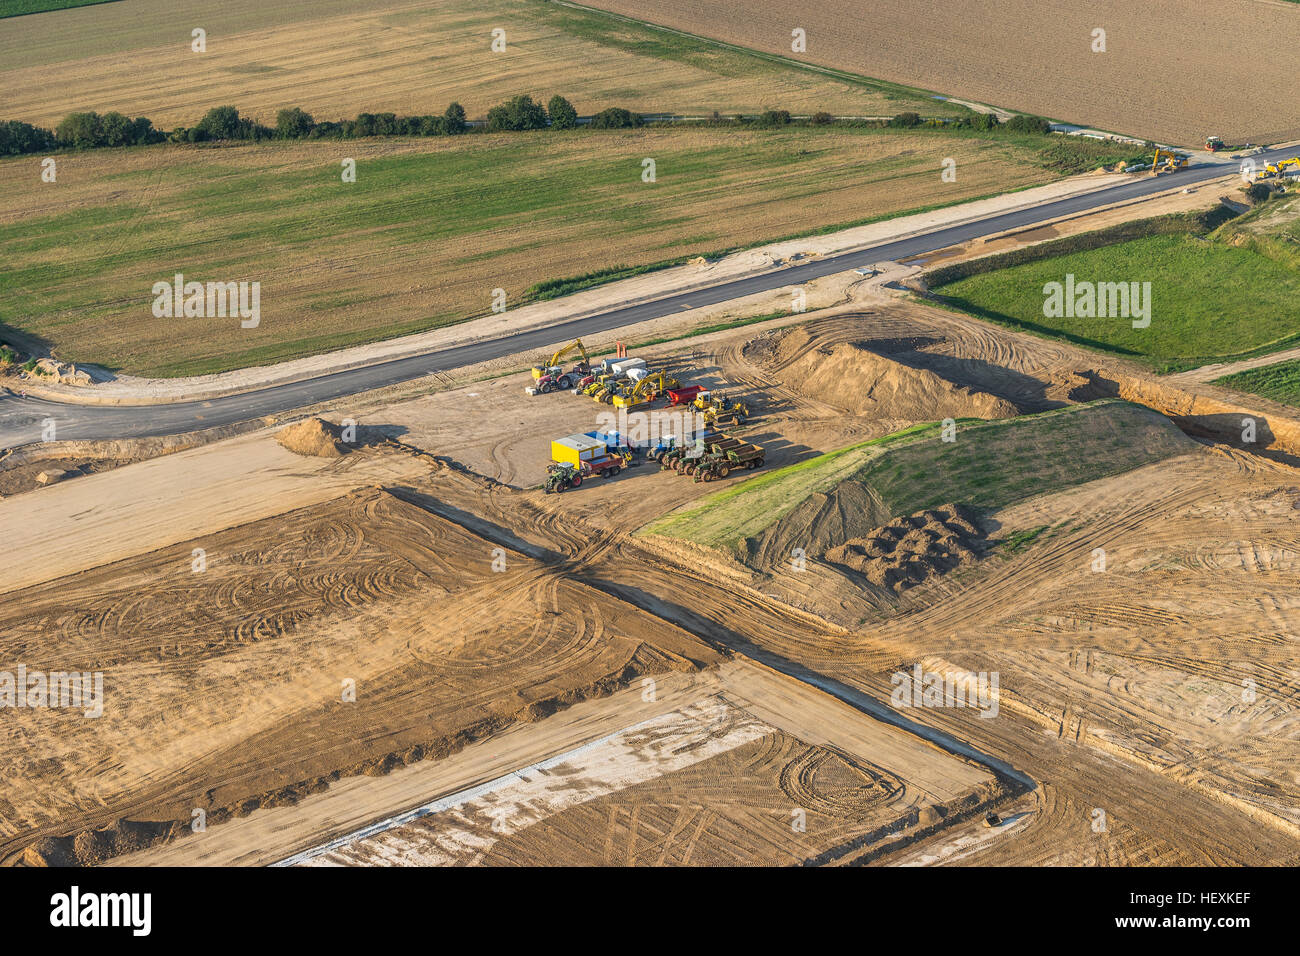 Germany, Hildesheim, arial view of agrarian area Stock Photo